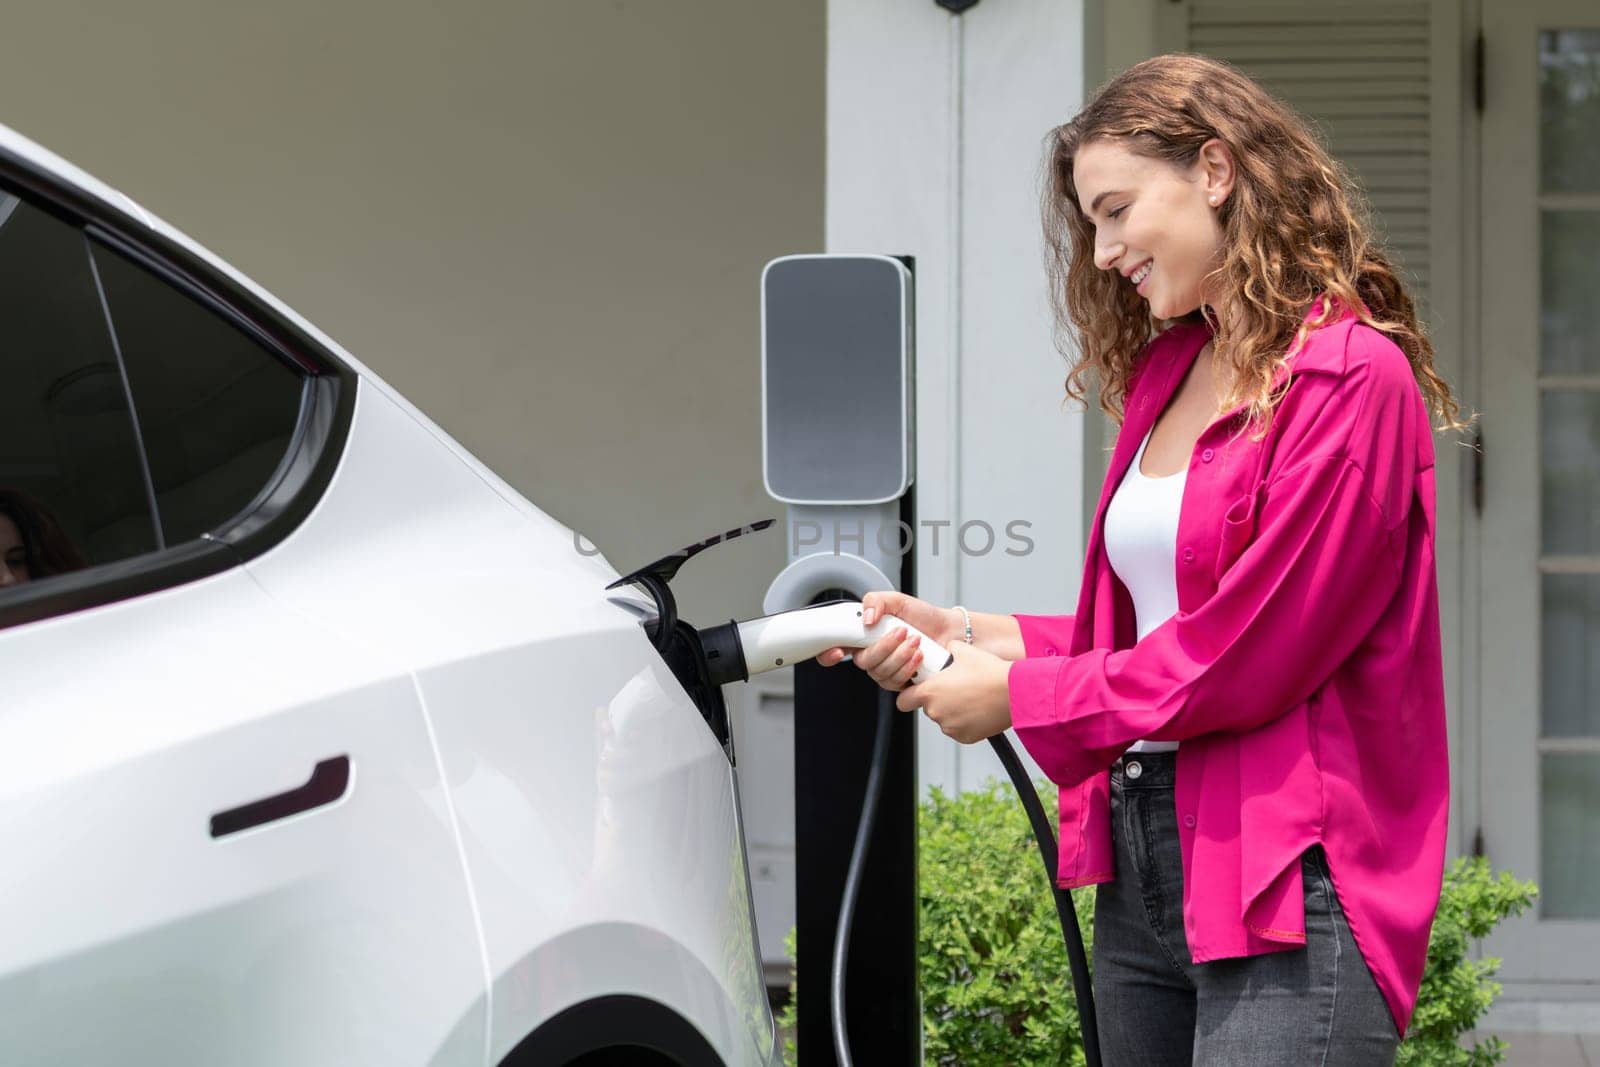 EV car technology utilized for home resident to future sustainability.Synchronos by biancoblue